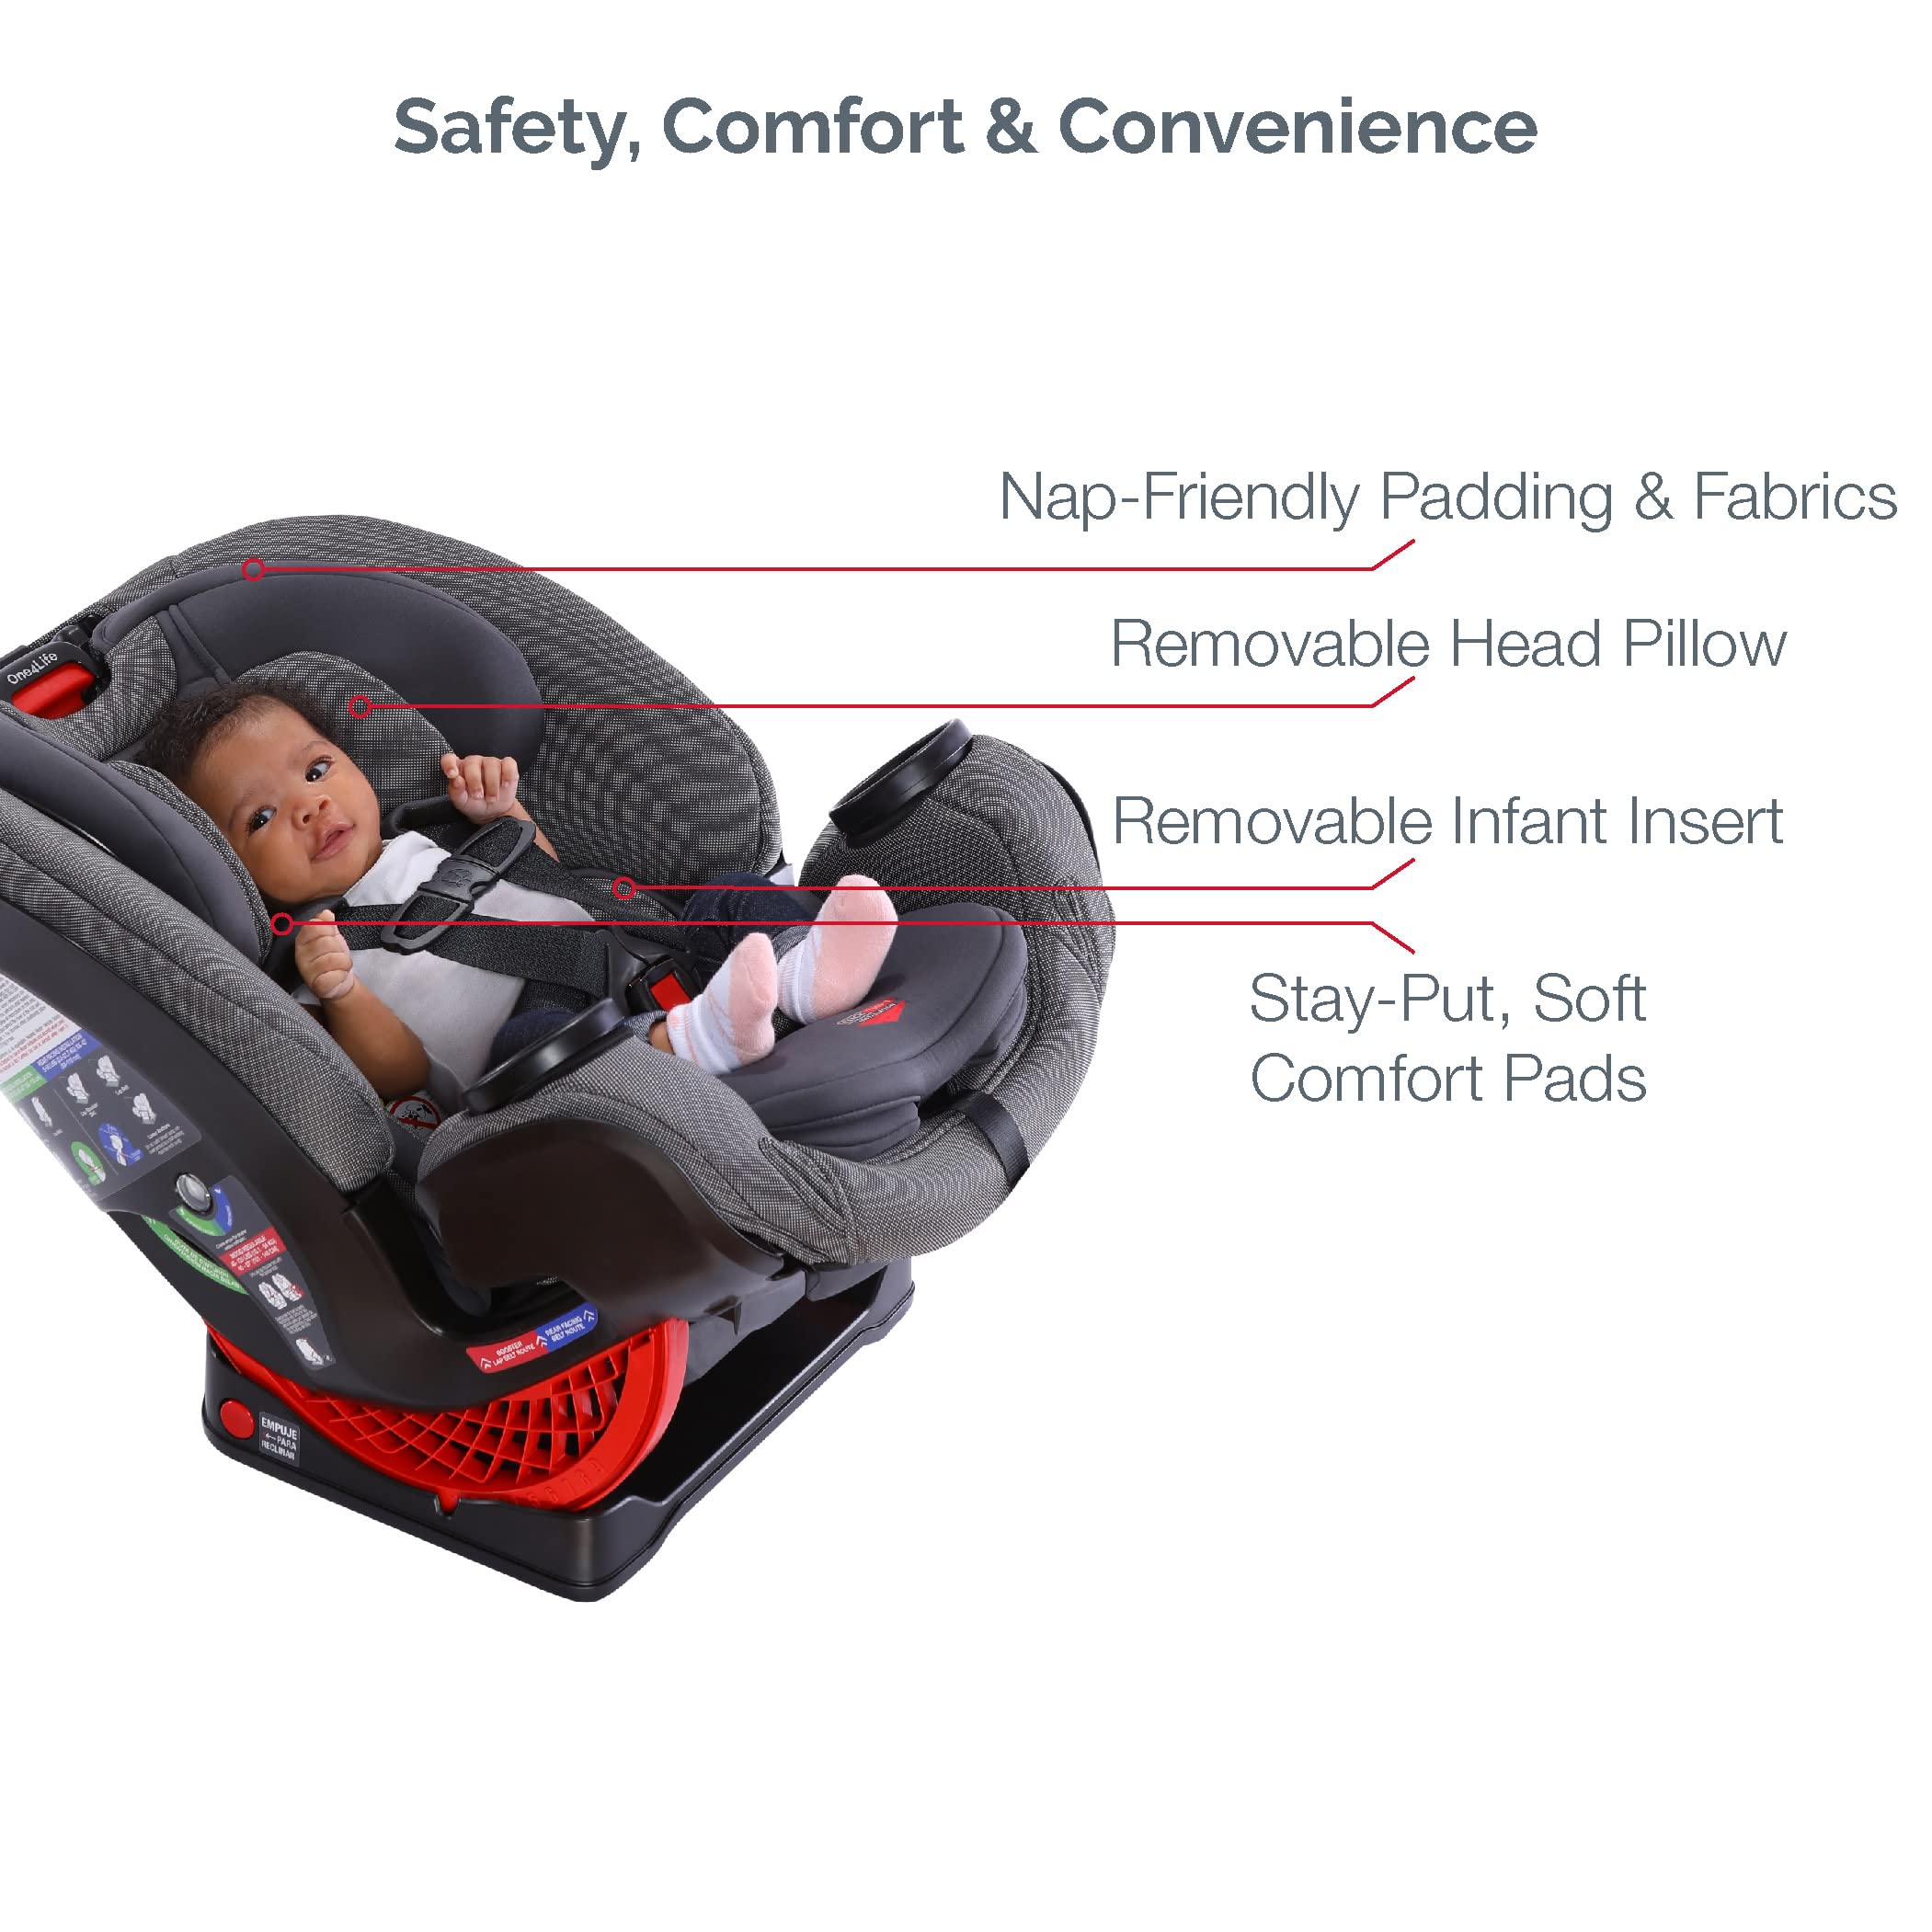 Britax One4Life ClickTight All-in-One Car Seat, Eclipse Black